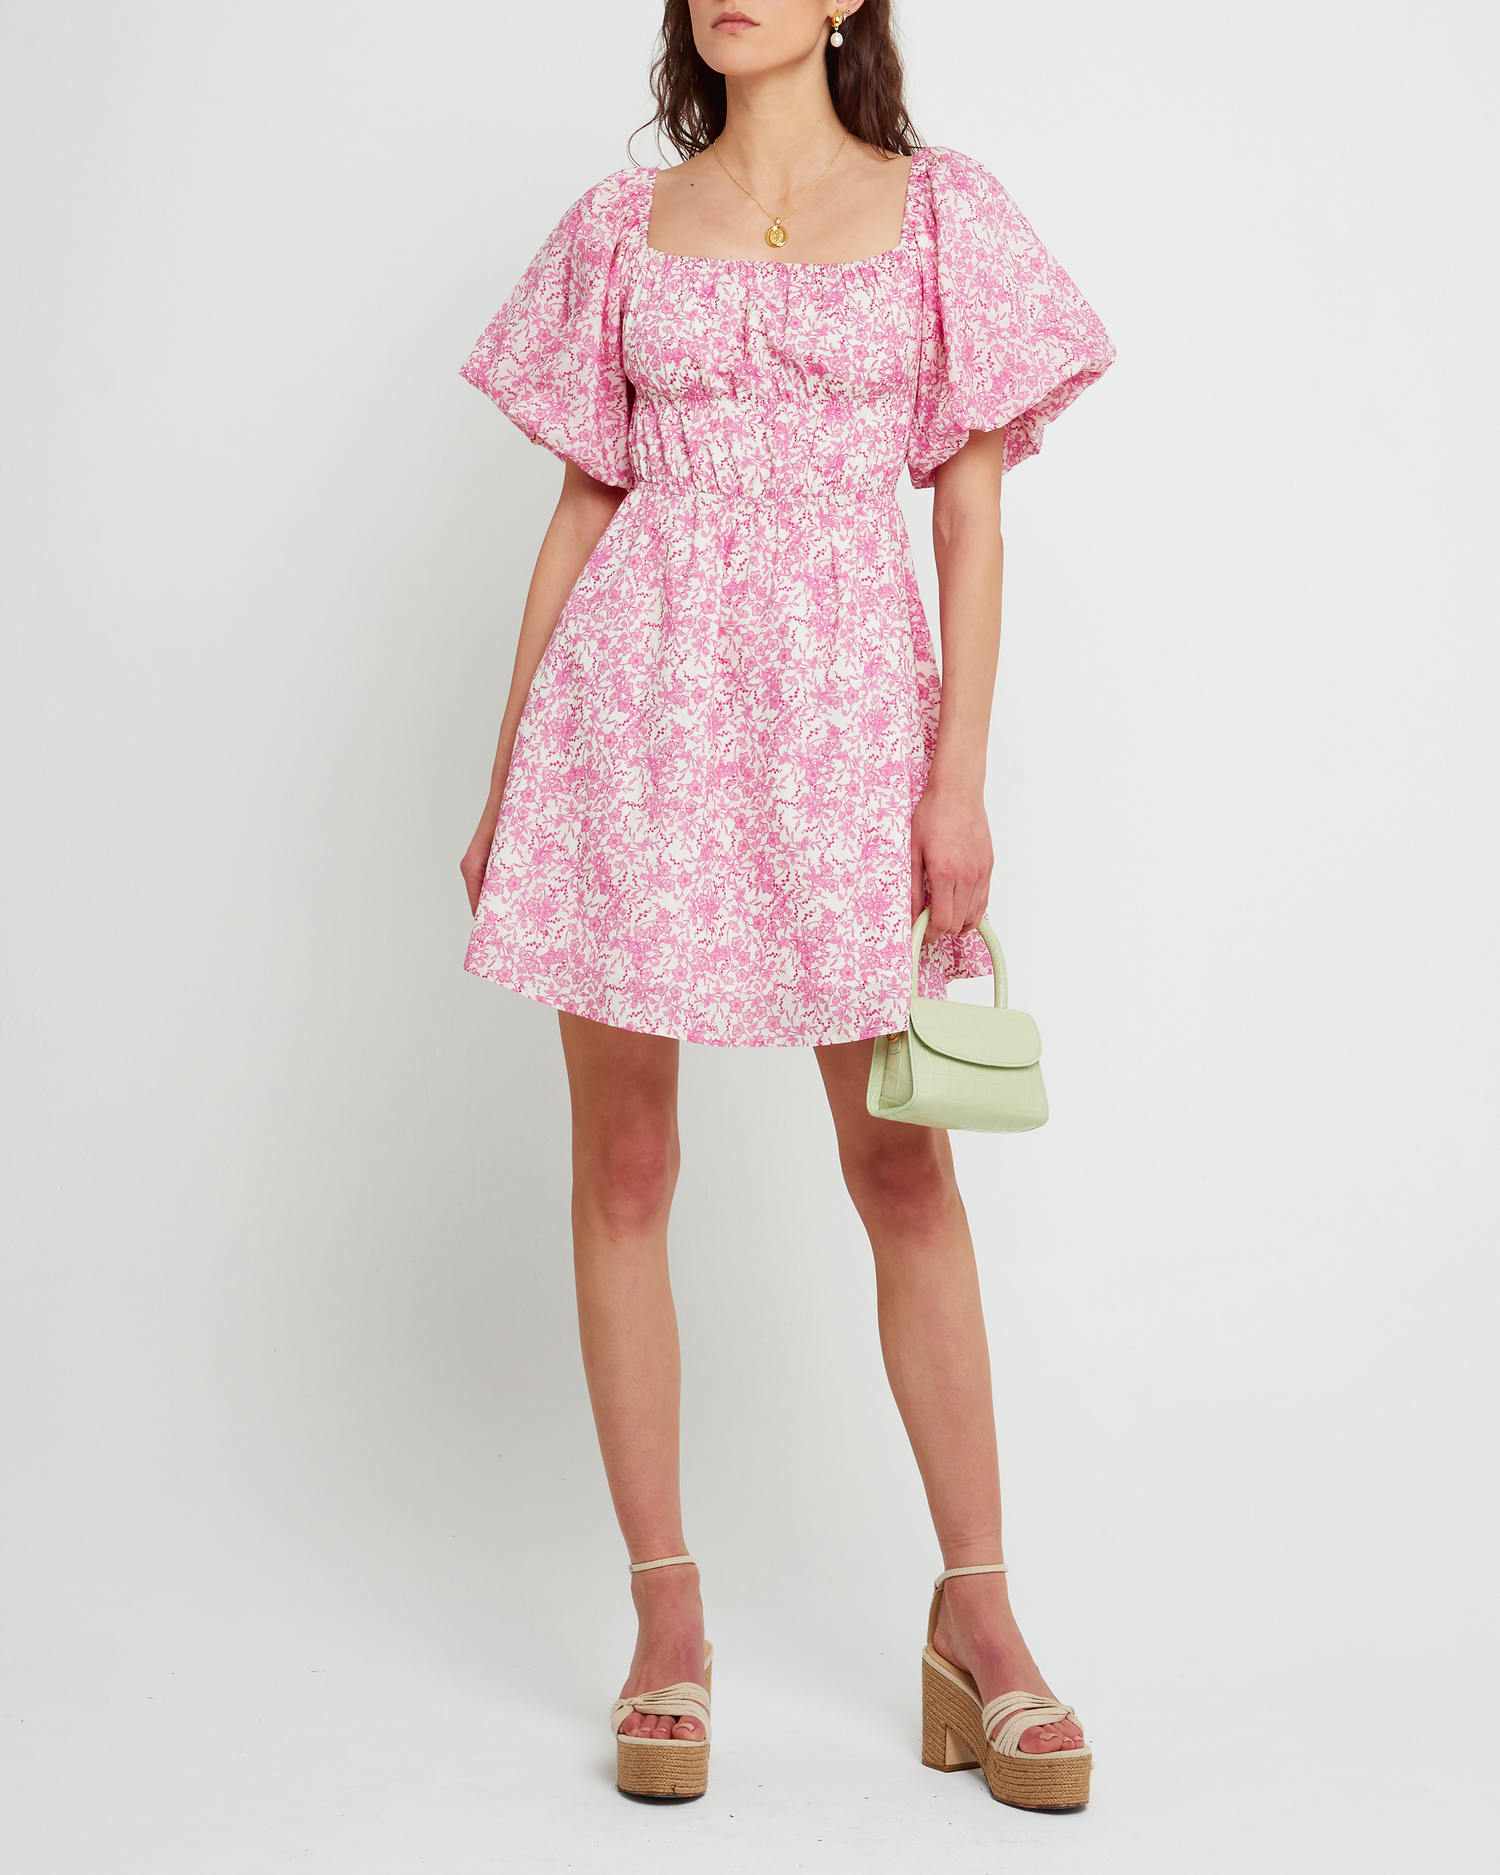 First image of Leanna Dress, a pink mini dress, floral, puff sleeves, short sleeves, gathered